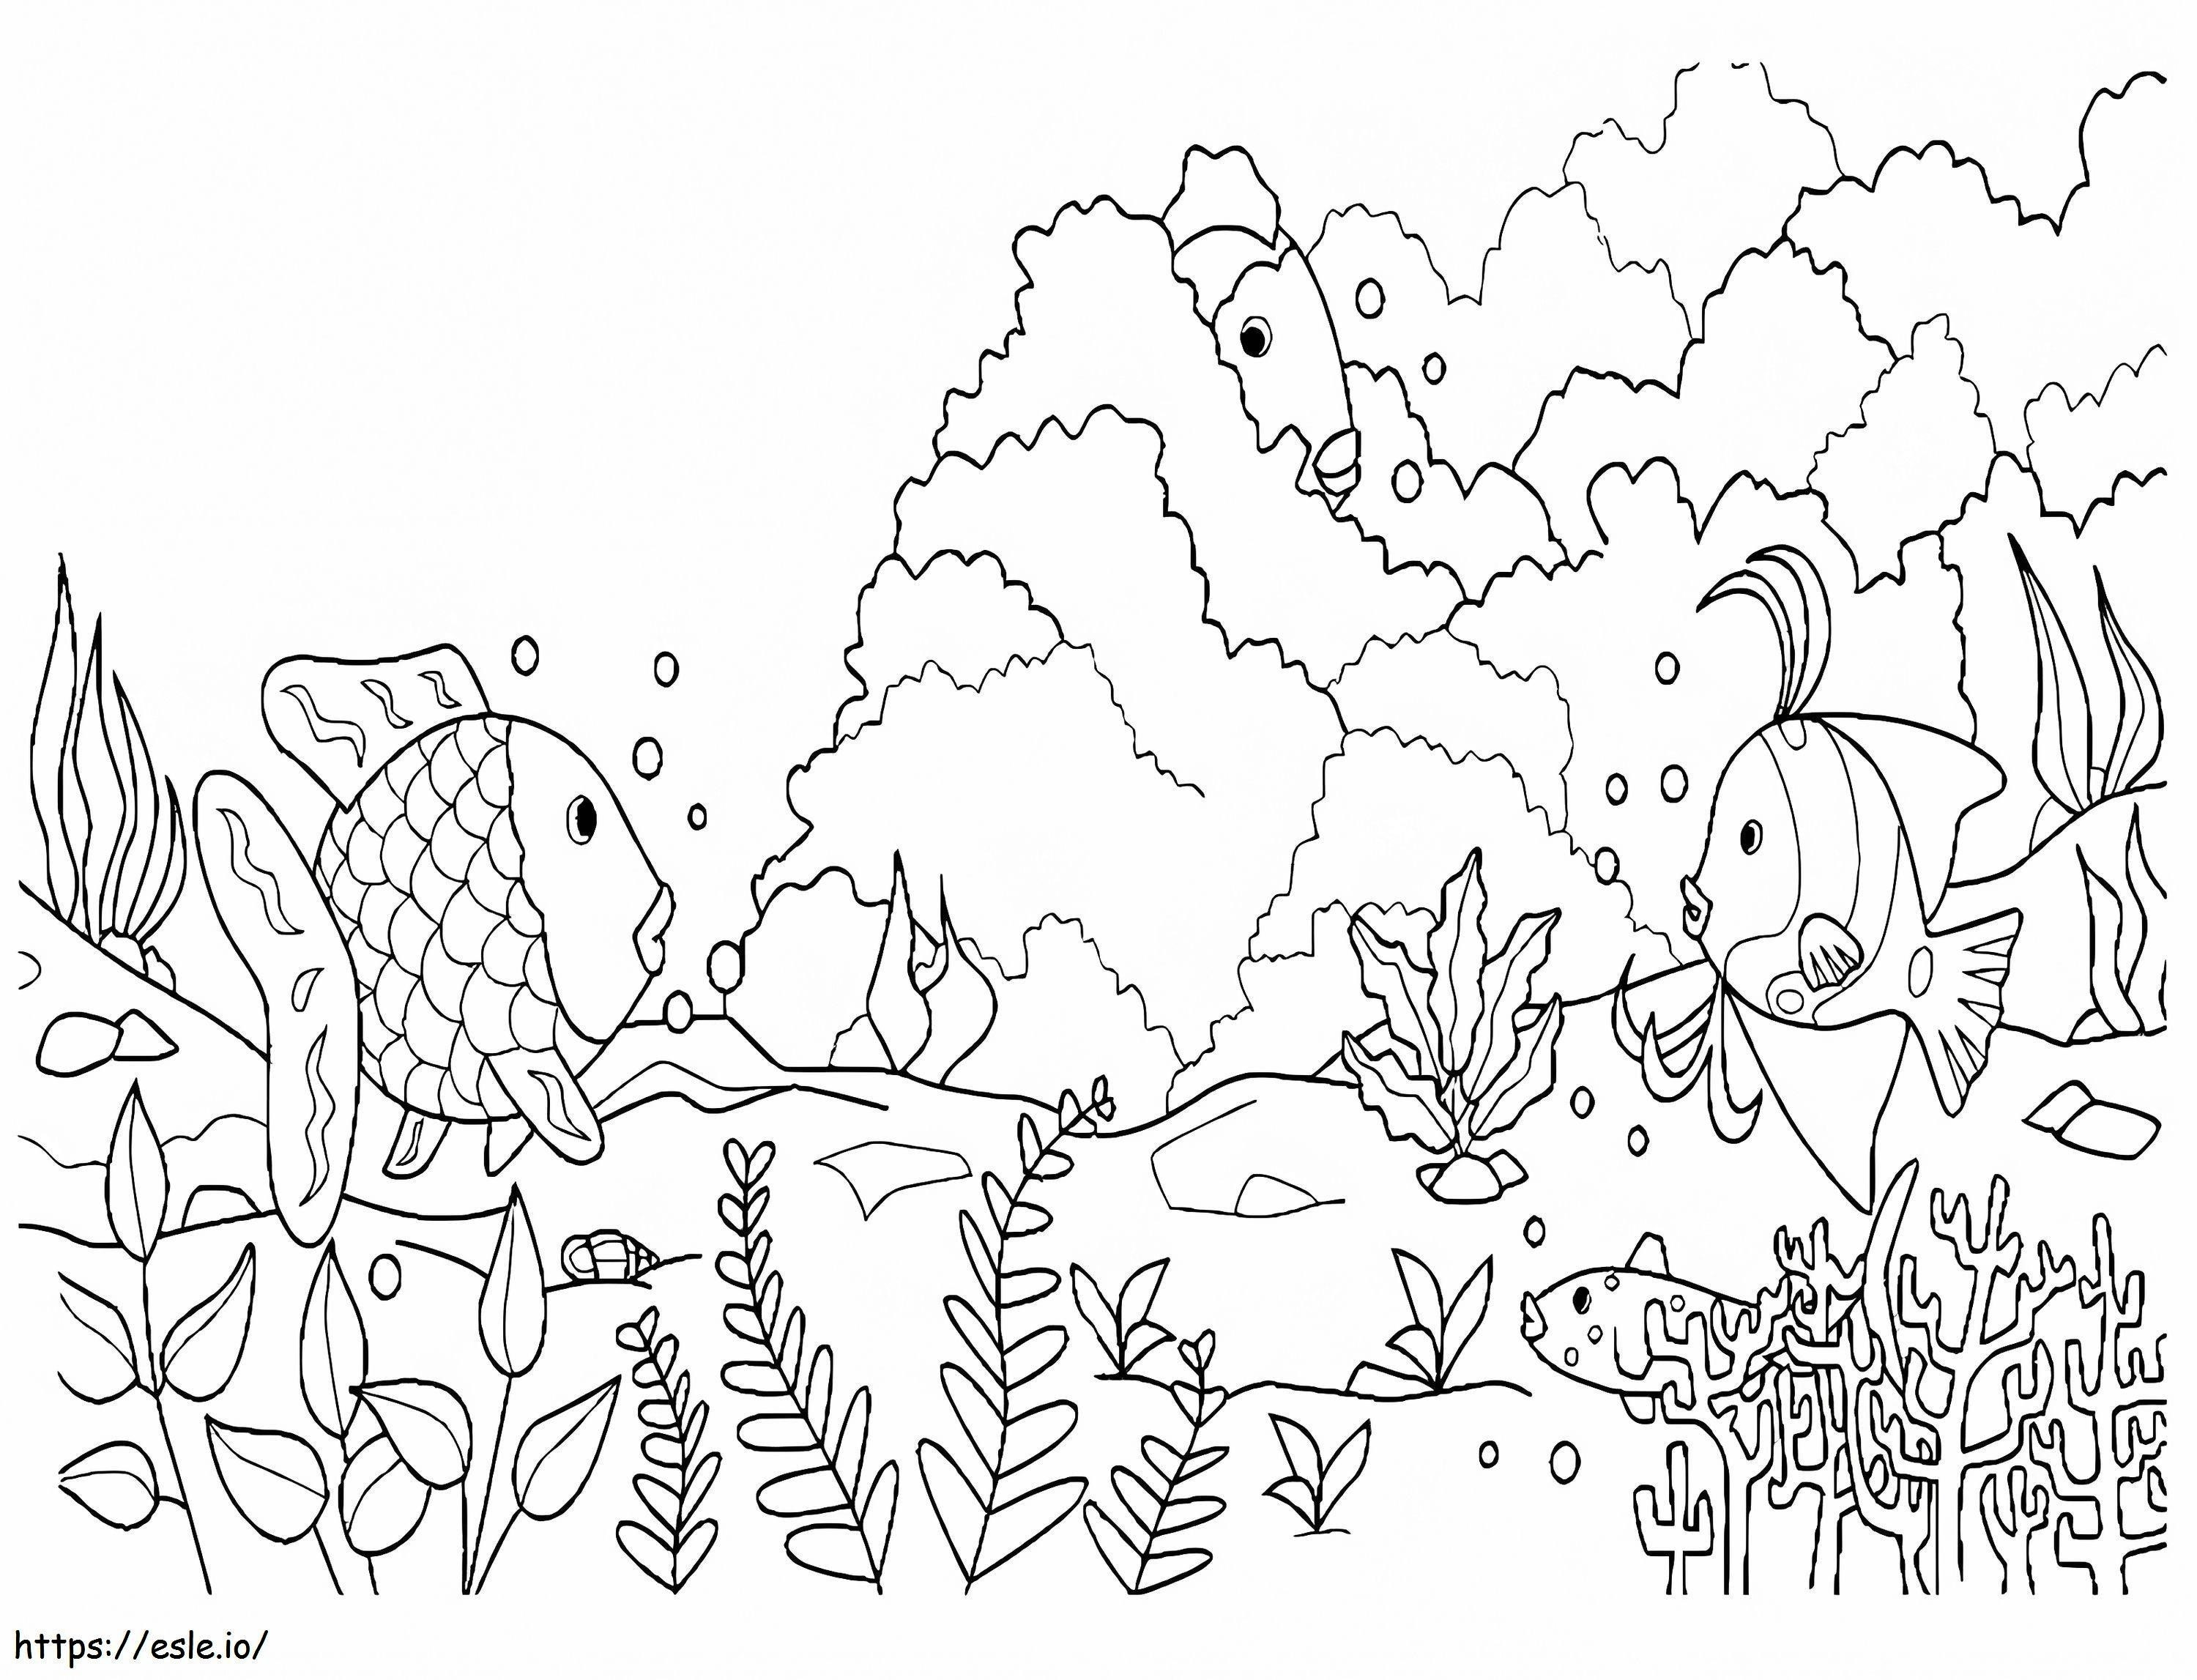 Rainbow Fish Playing Hide And Seek coloring page